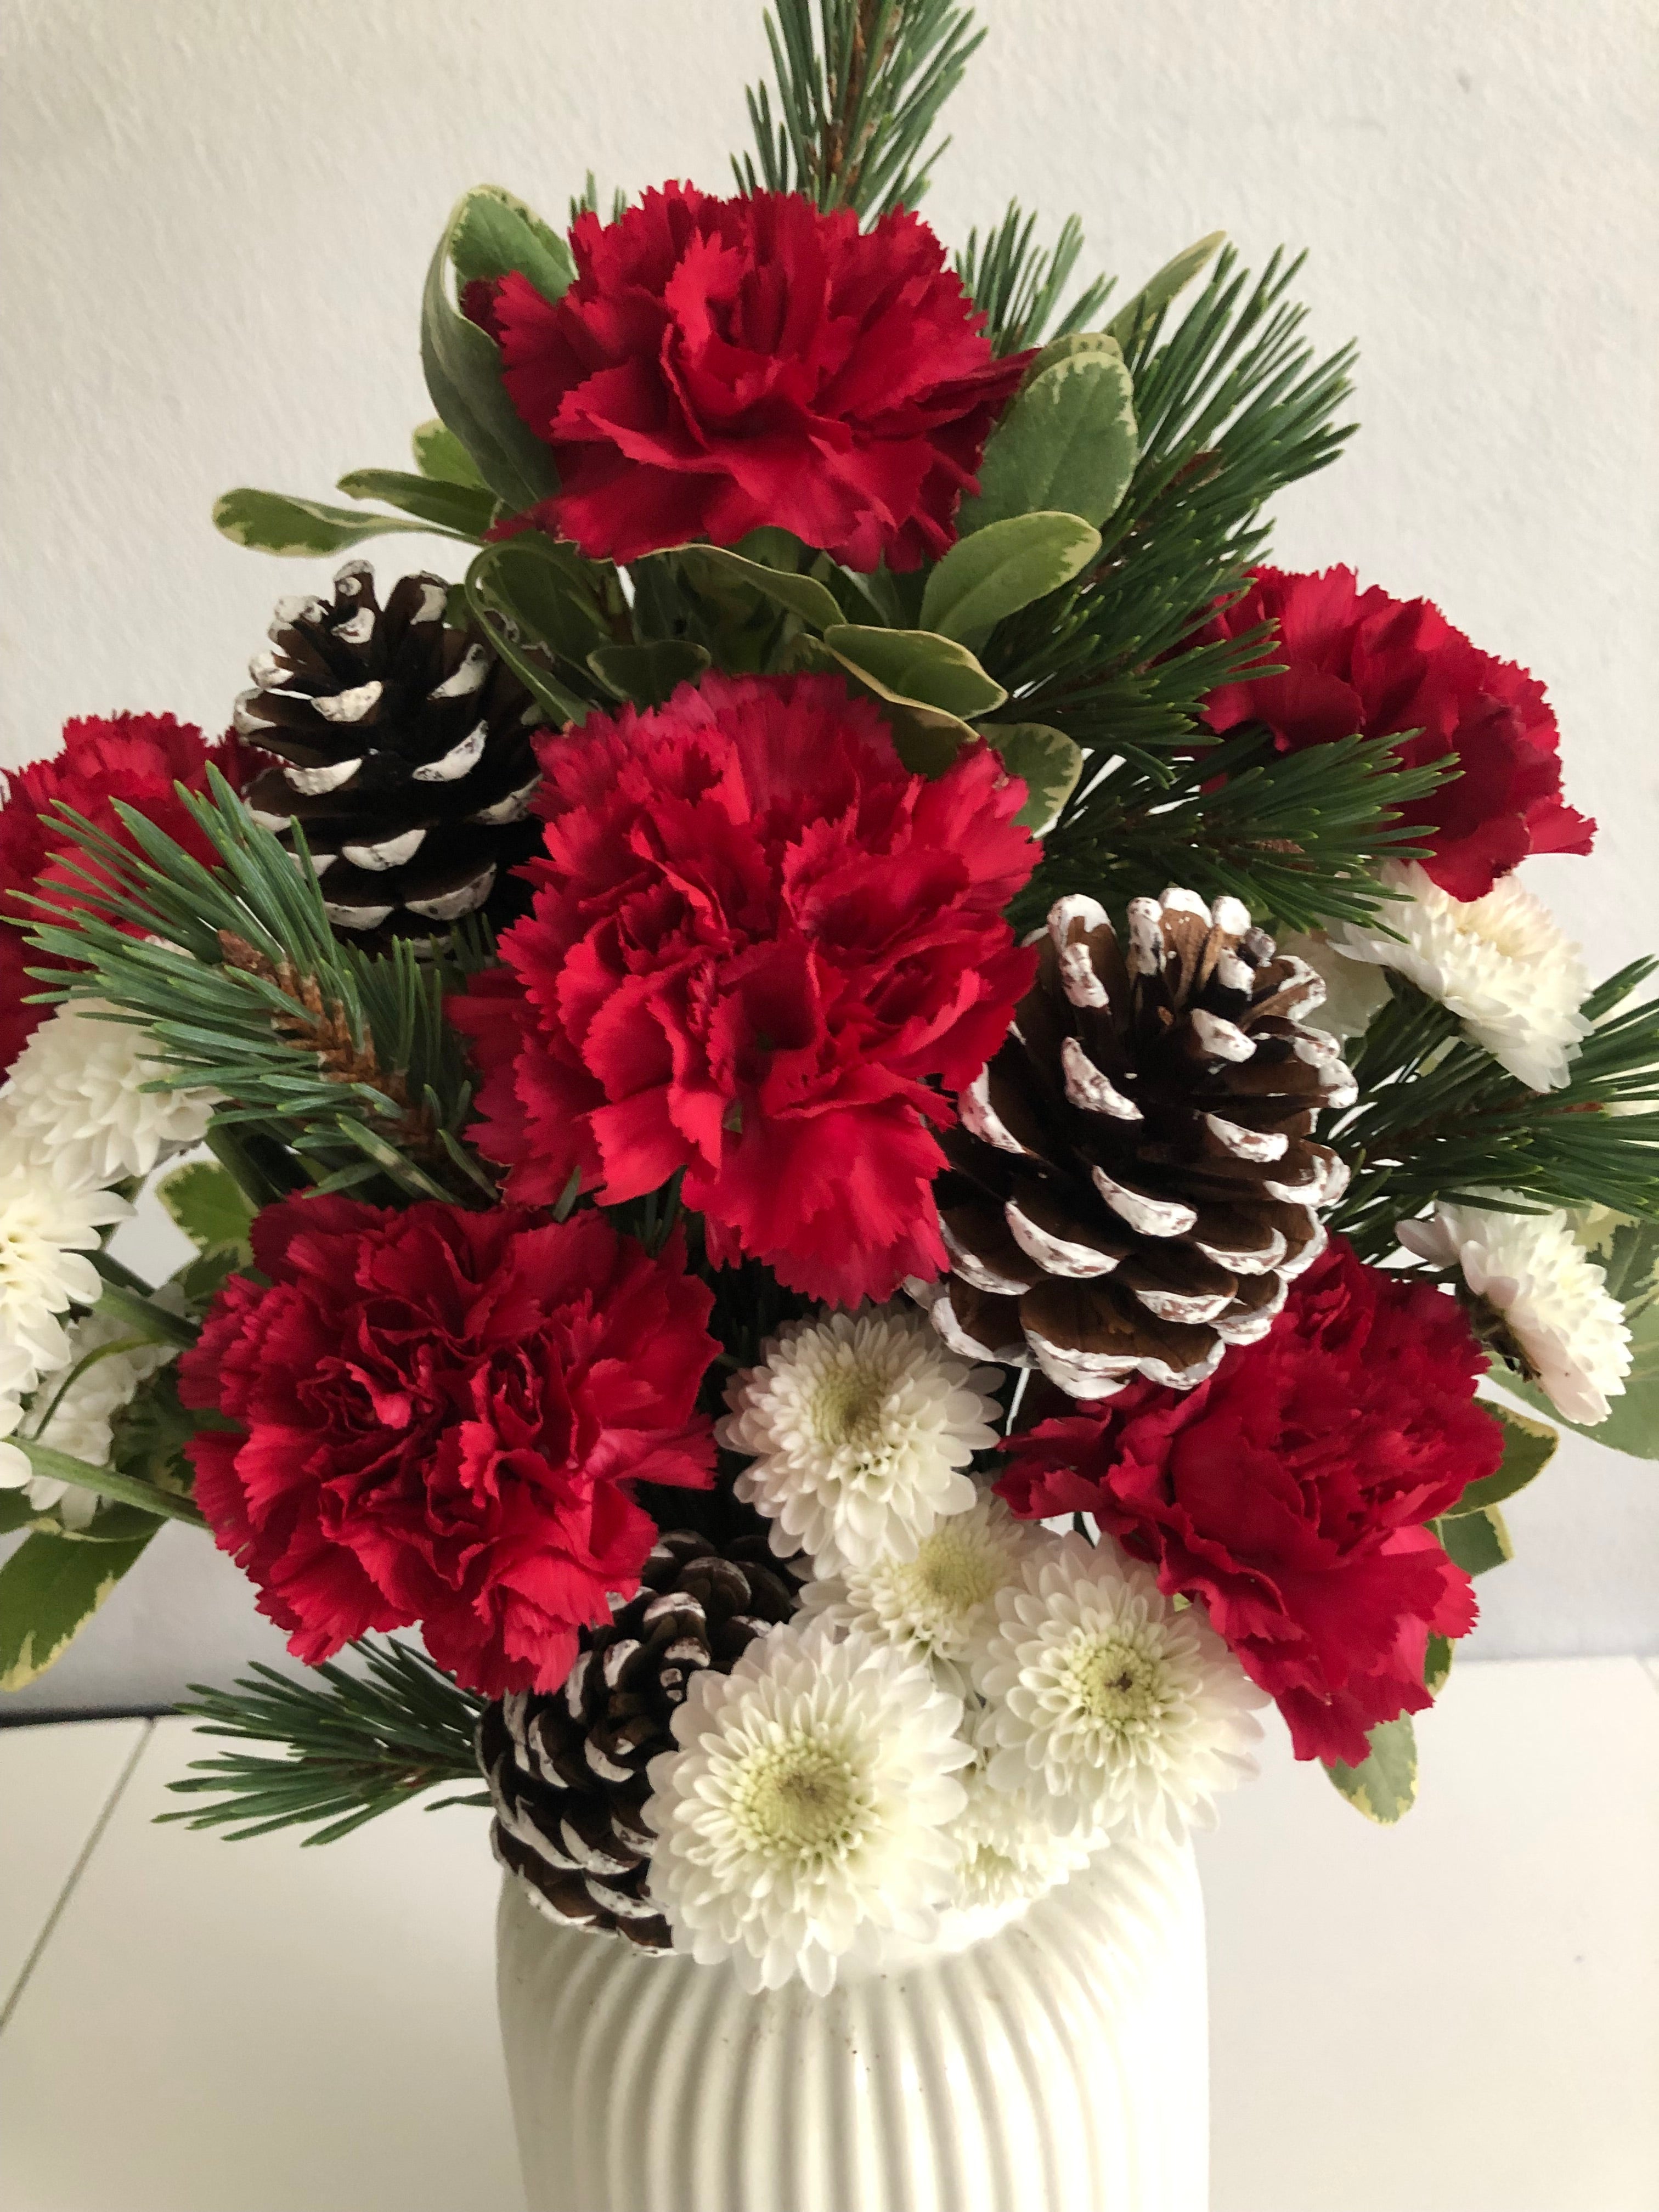 Afishapa Bouquet - normally £35 now